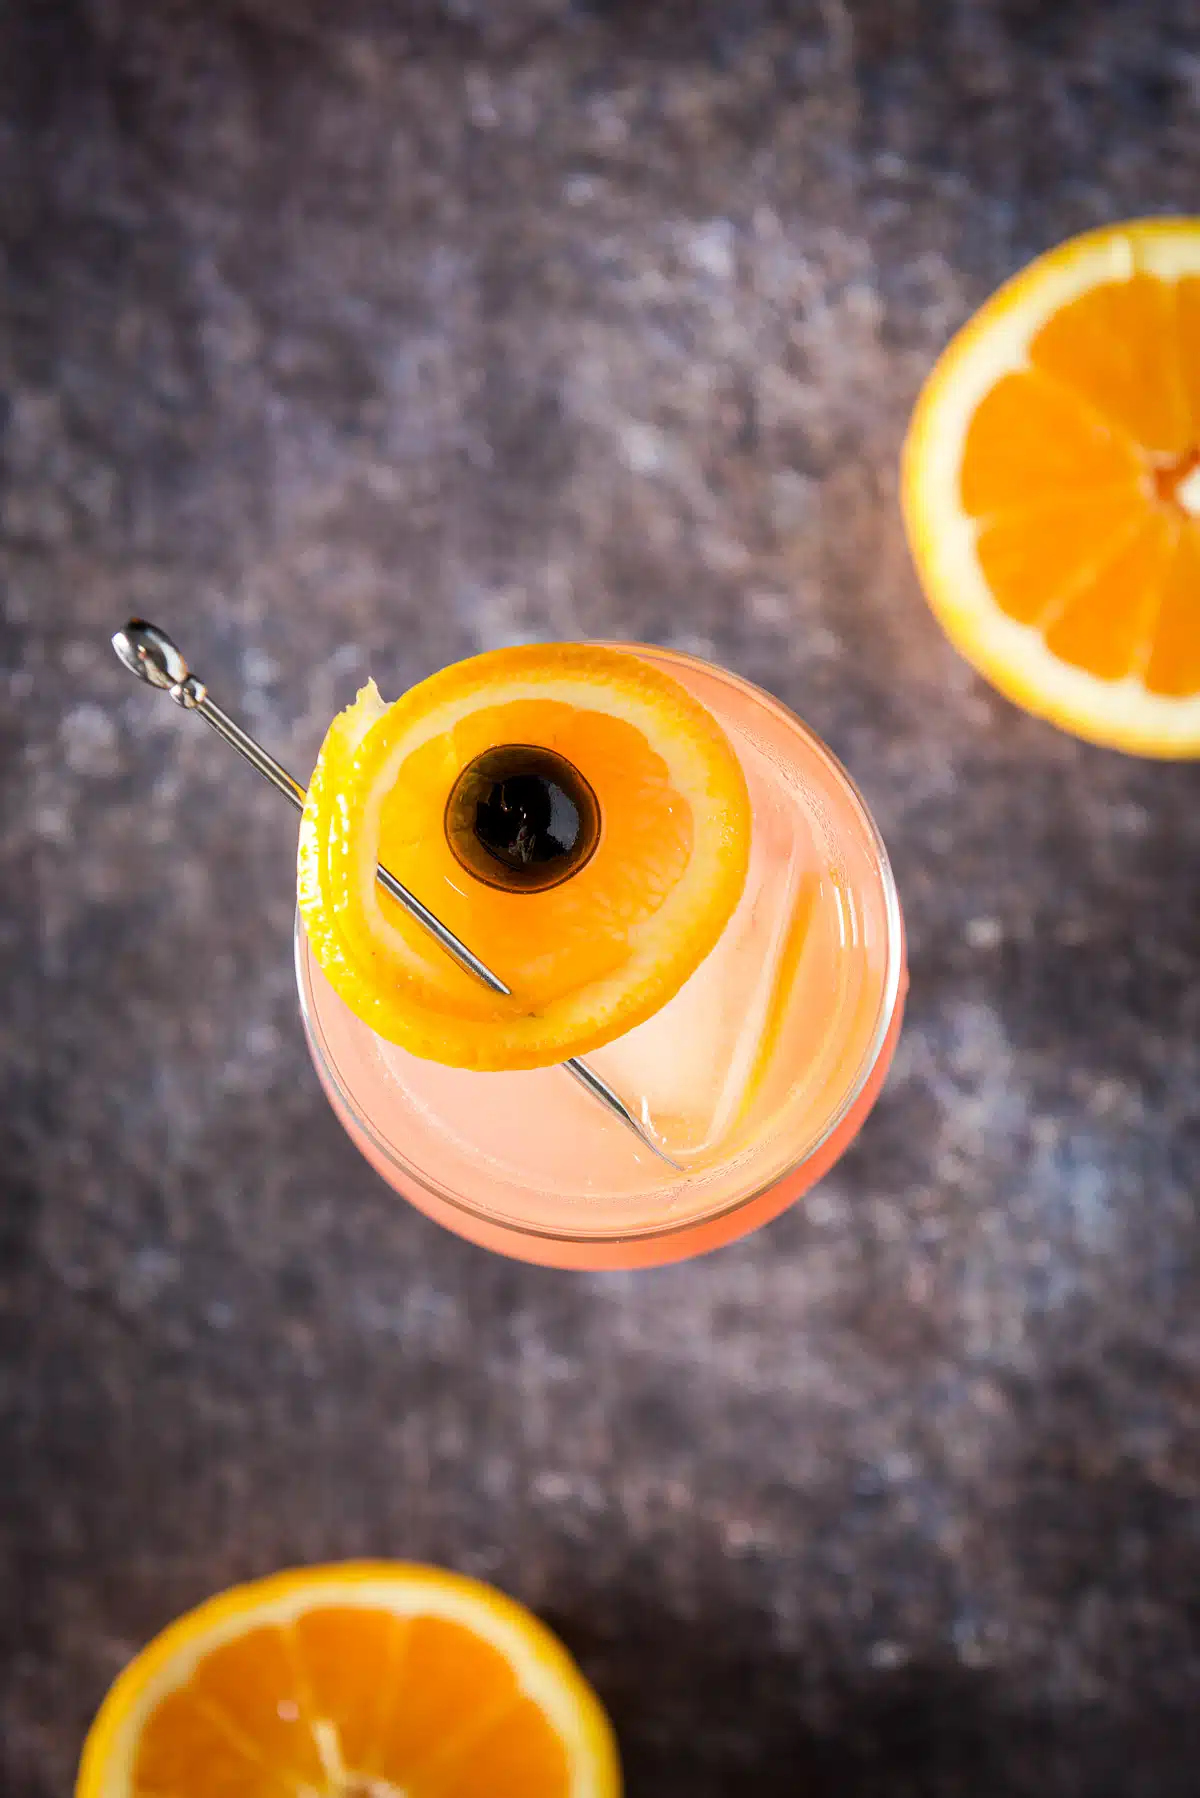 Overhead view of the cocktail with the orange cup garnish featured and the orange slices on table